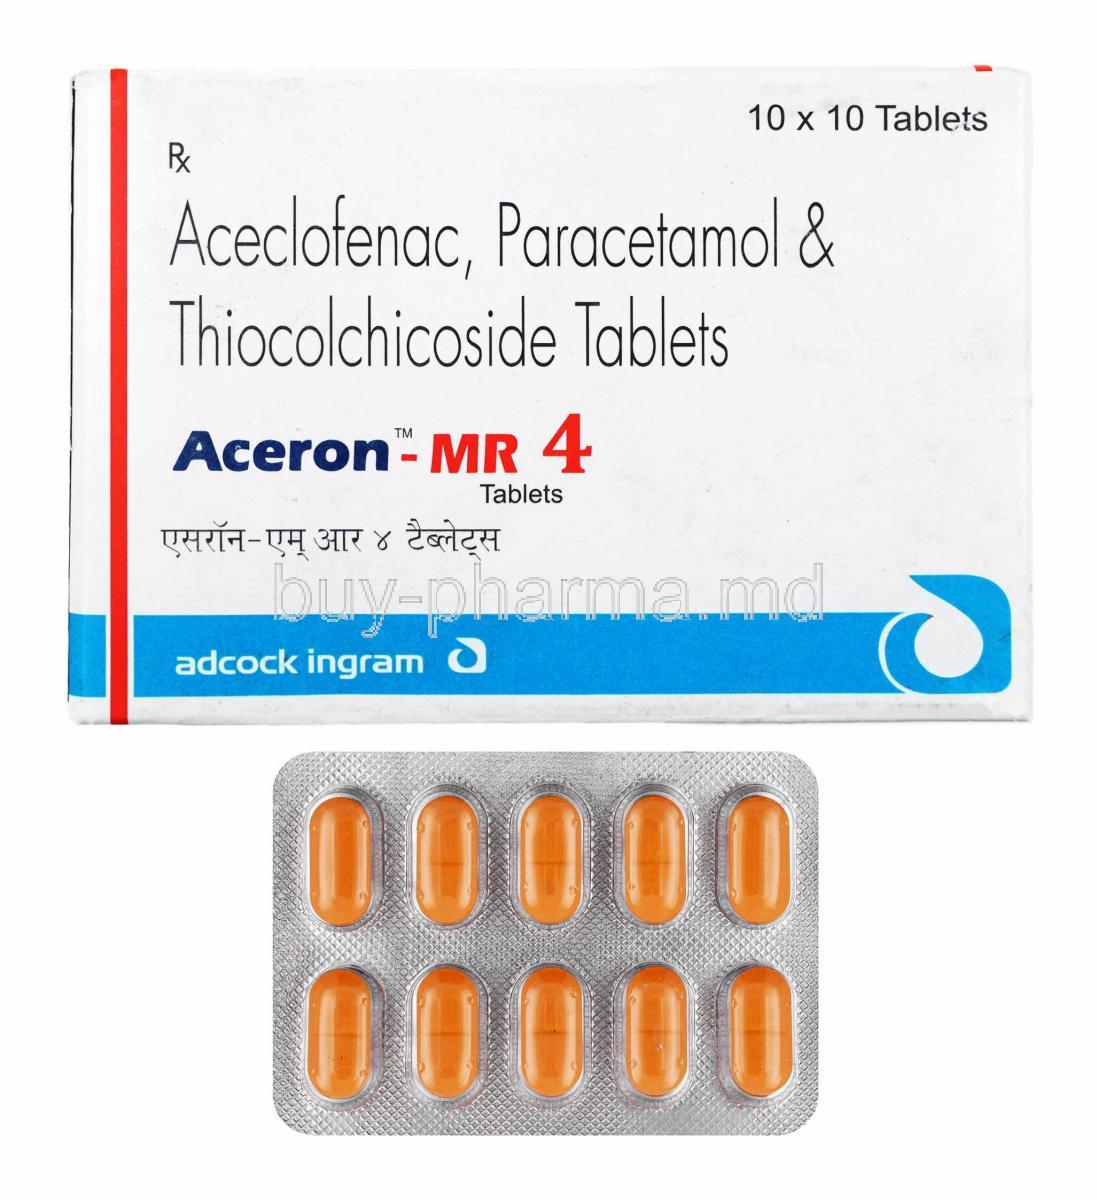 Aceron-MR, Aceclofenac and Thiocolchicoside box and tablets